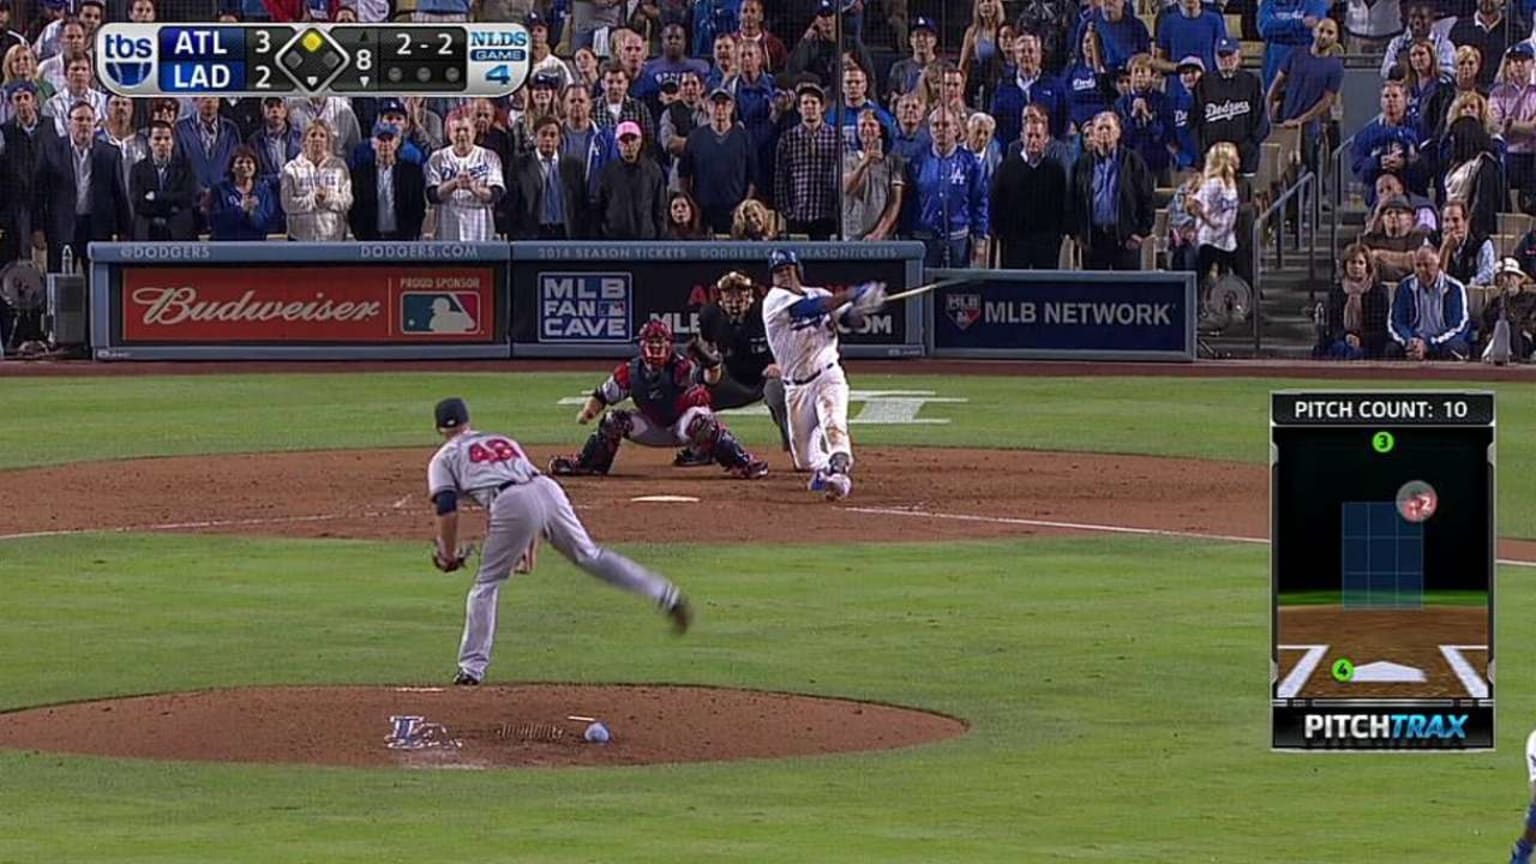 Juan Uribe hits go-ahead homer to lead Dodgers past Braves and clinch NLDS  – New York Daily News